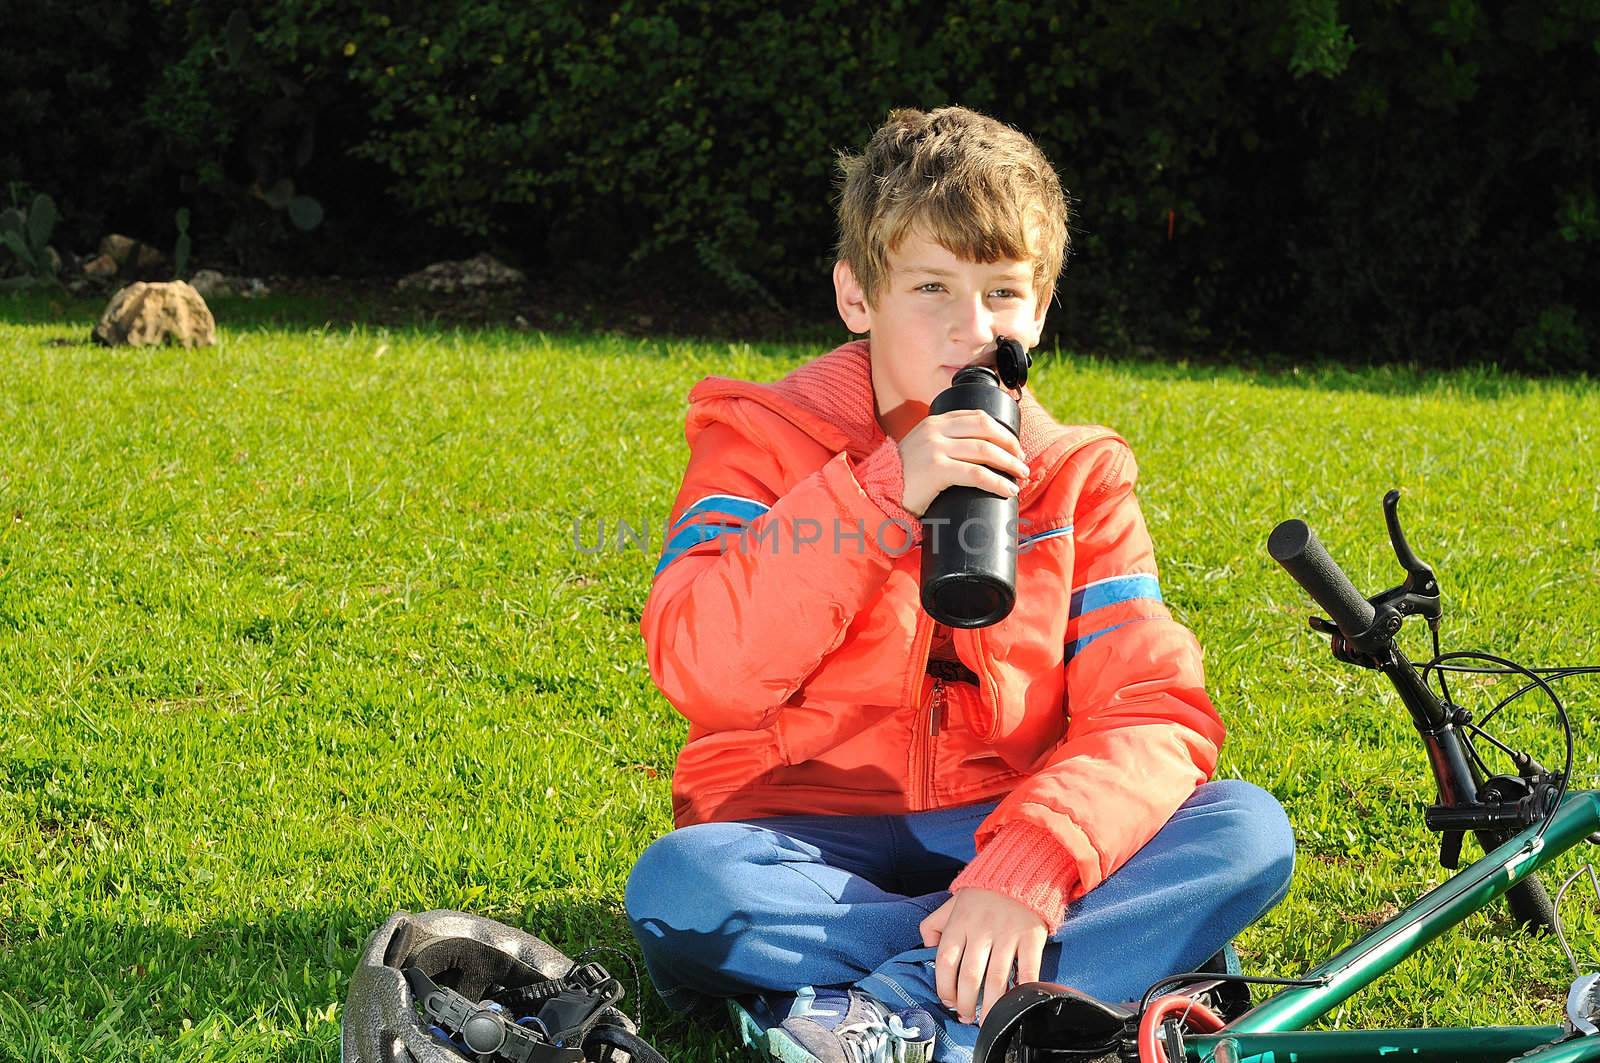 
The boy sitting on the grass in a park near the bike and drinking water from a bottle